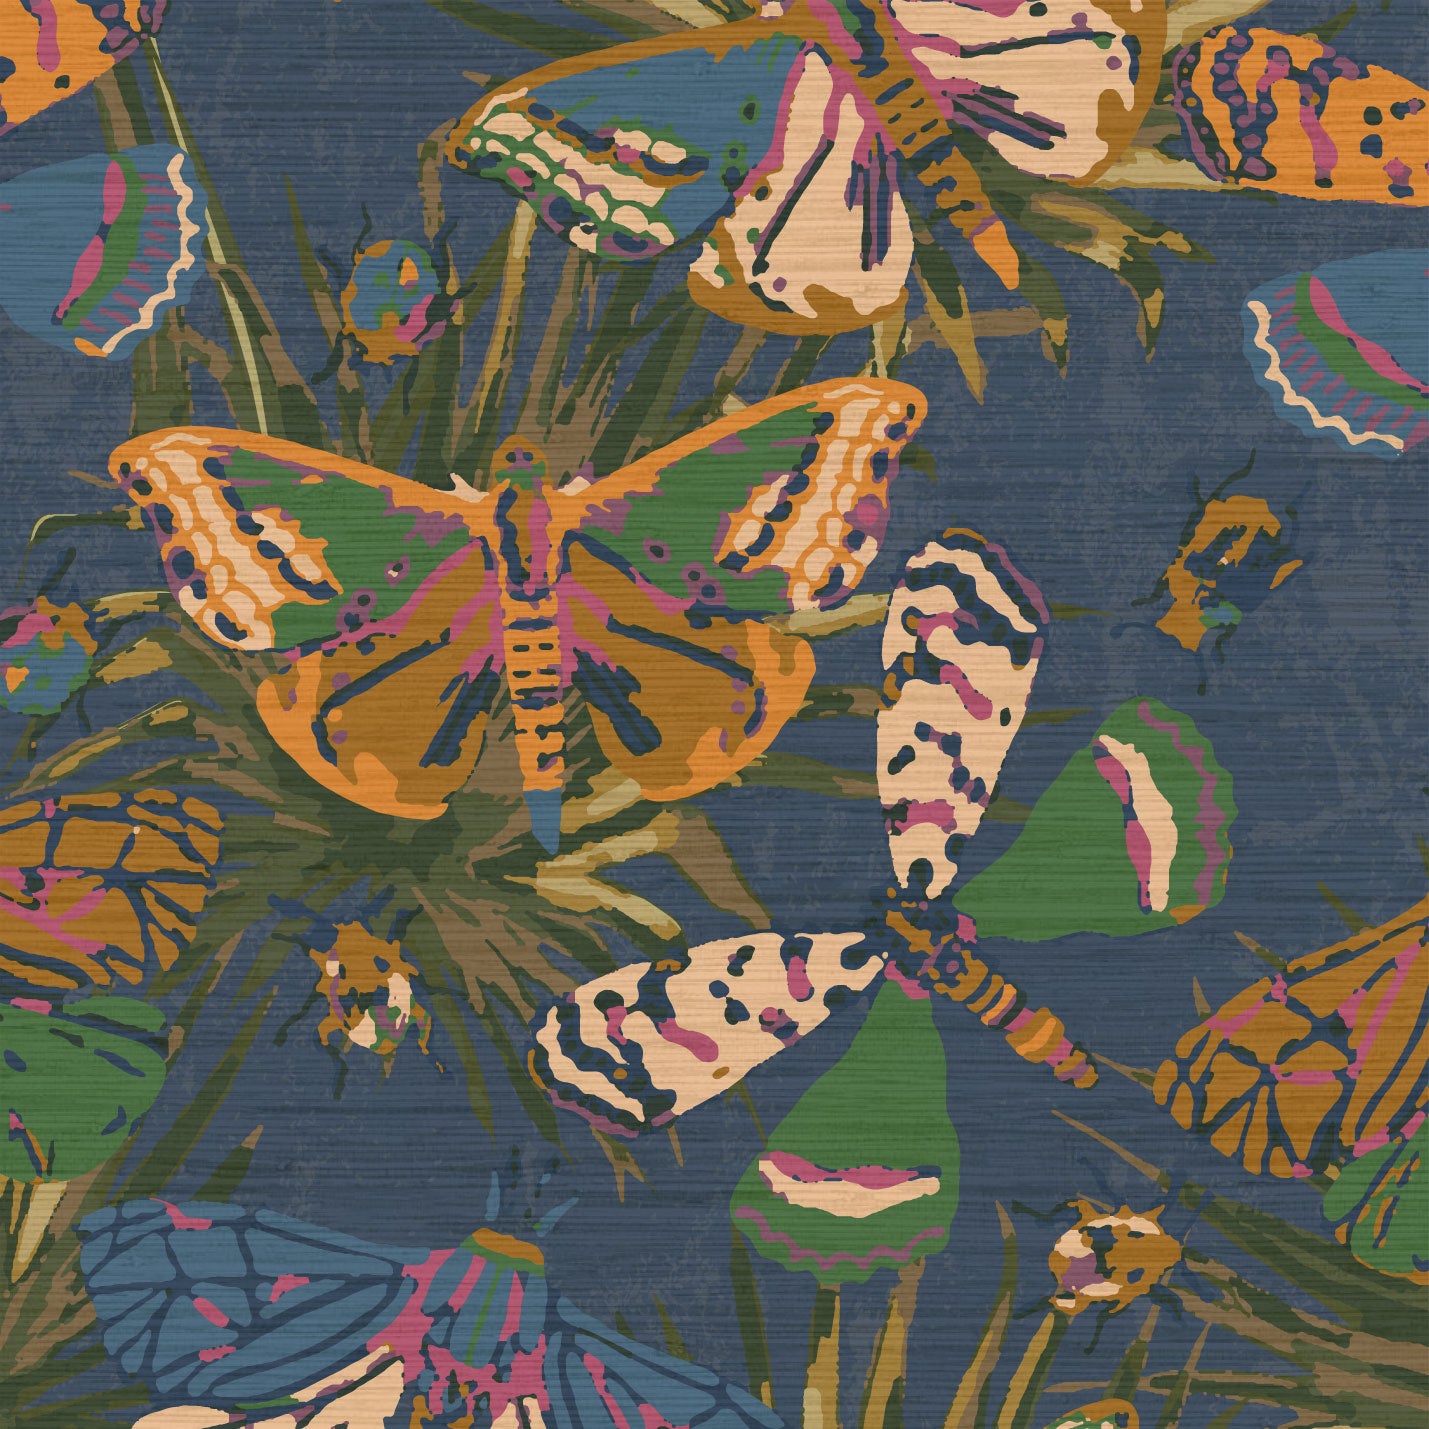 Load image into Gallery viewer, Grasscloth printed wallpaper with allover butterflies, palm leaves and mini insects overlapped in an oversized print.Grasscloth wallpaper Natural Textured Eco-Friendly Non-toxic High-quality Sustainable Interior Design Bold Custom Tailor-made Retro chic Bold tropical butterfly bug palm leaves animals botanical garden nature kids playroom bedroom nursery navy green jungle blue dark
